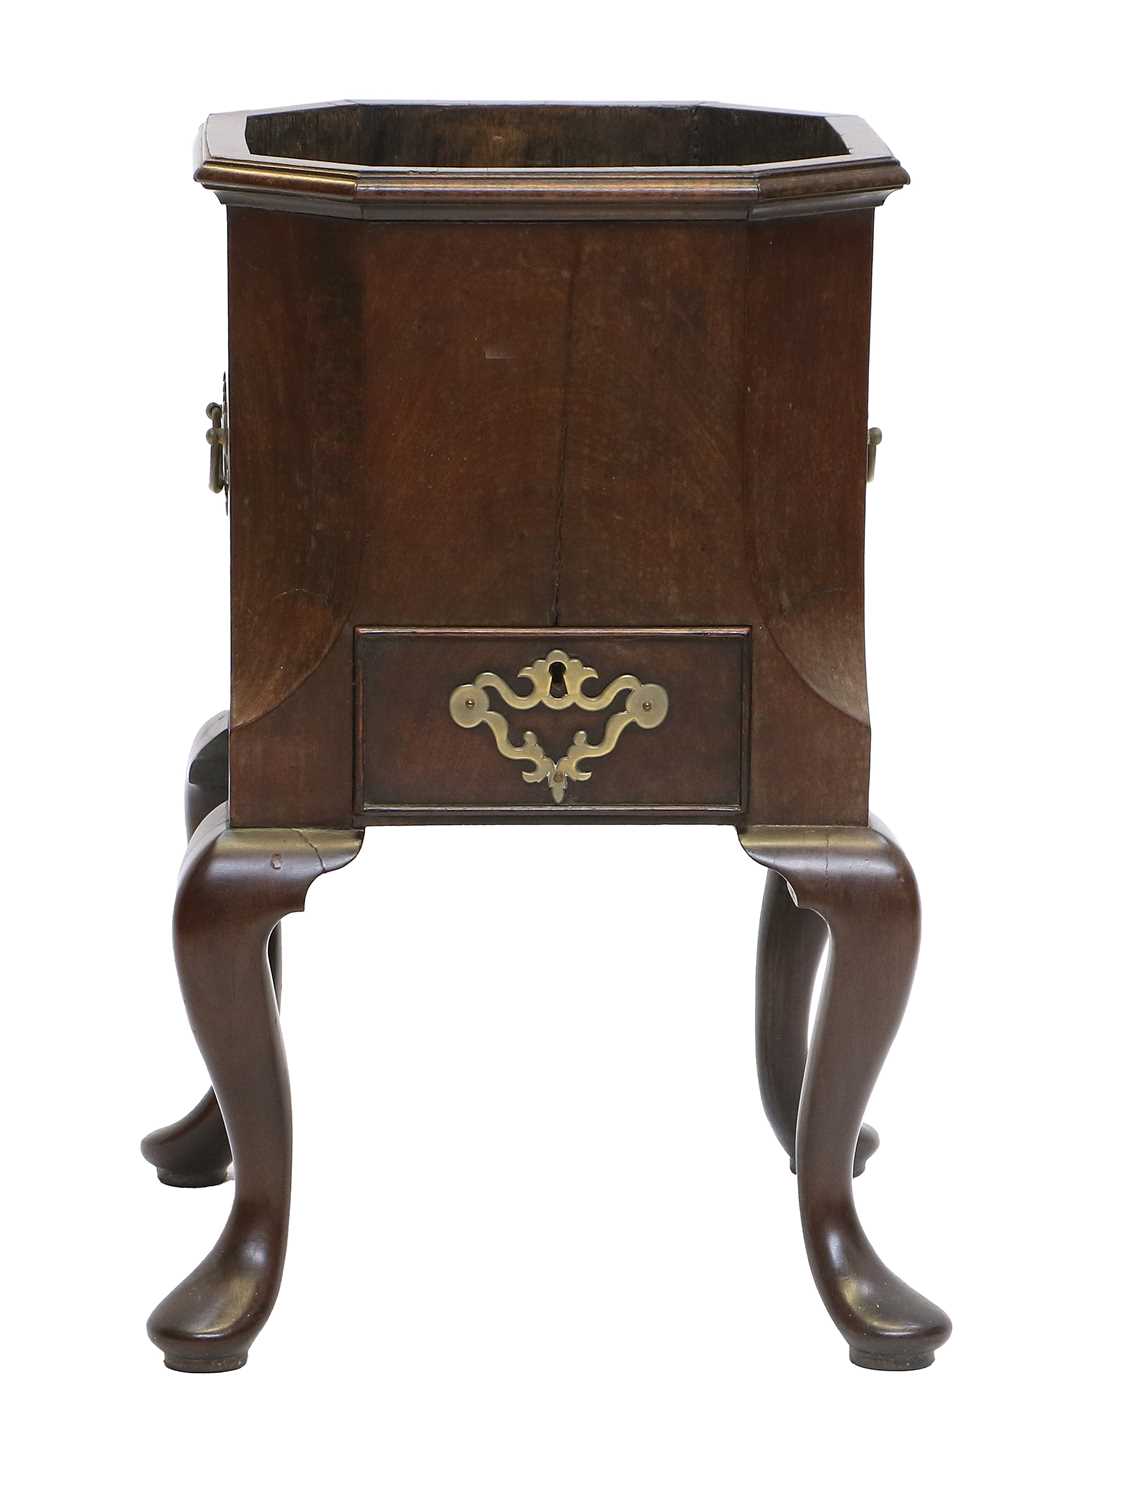 A George III Mahogany Planter, late 18th century, of octagonal-shaped form with brass carrying - Image 5 of 8